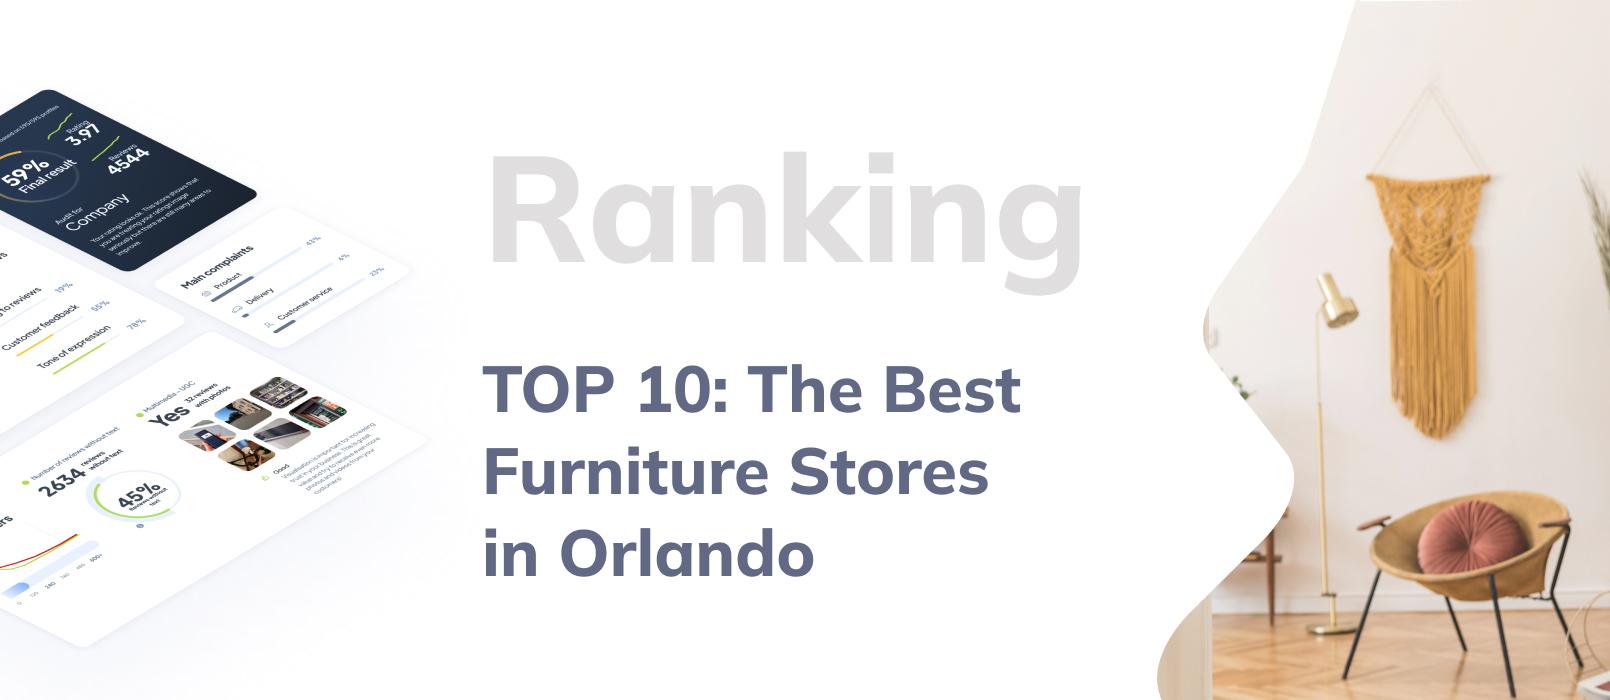 TOP 10 Furniture Stores in Orlando - Ranking Based on Customers Reviews